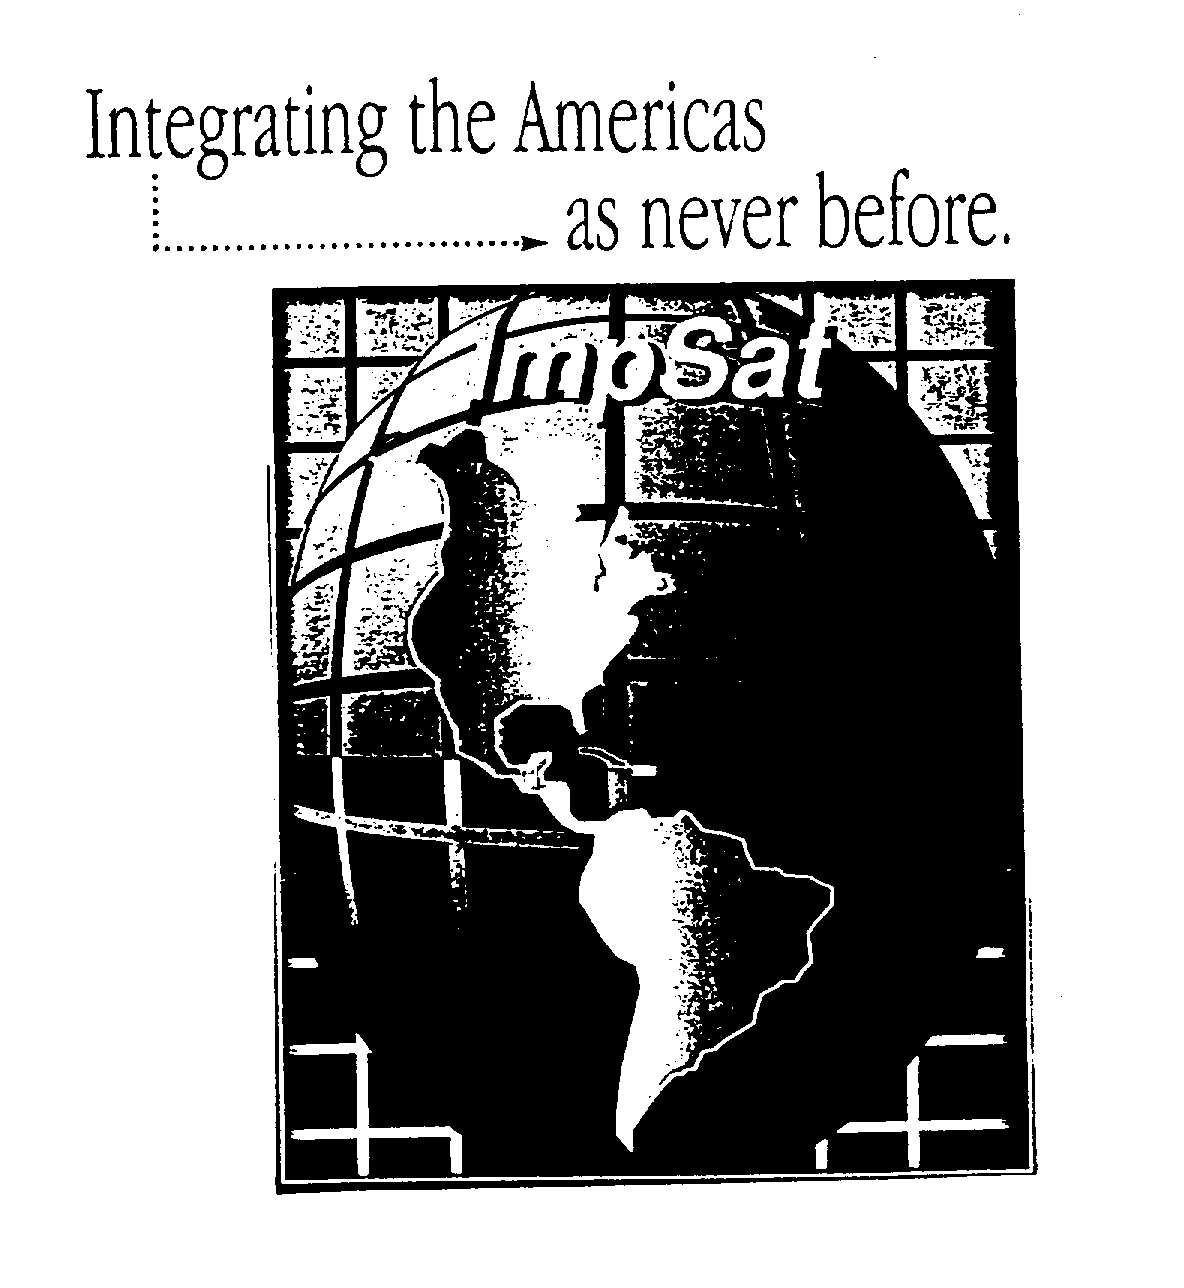  IMPSAT INTEGRATING THE AMERICAS AS NEVER BEFORE.